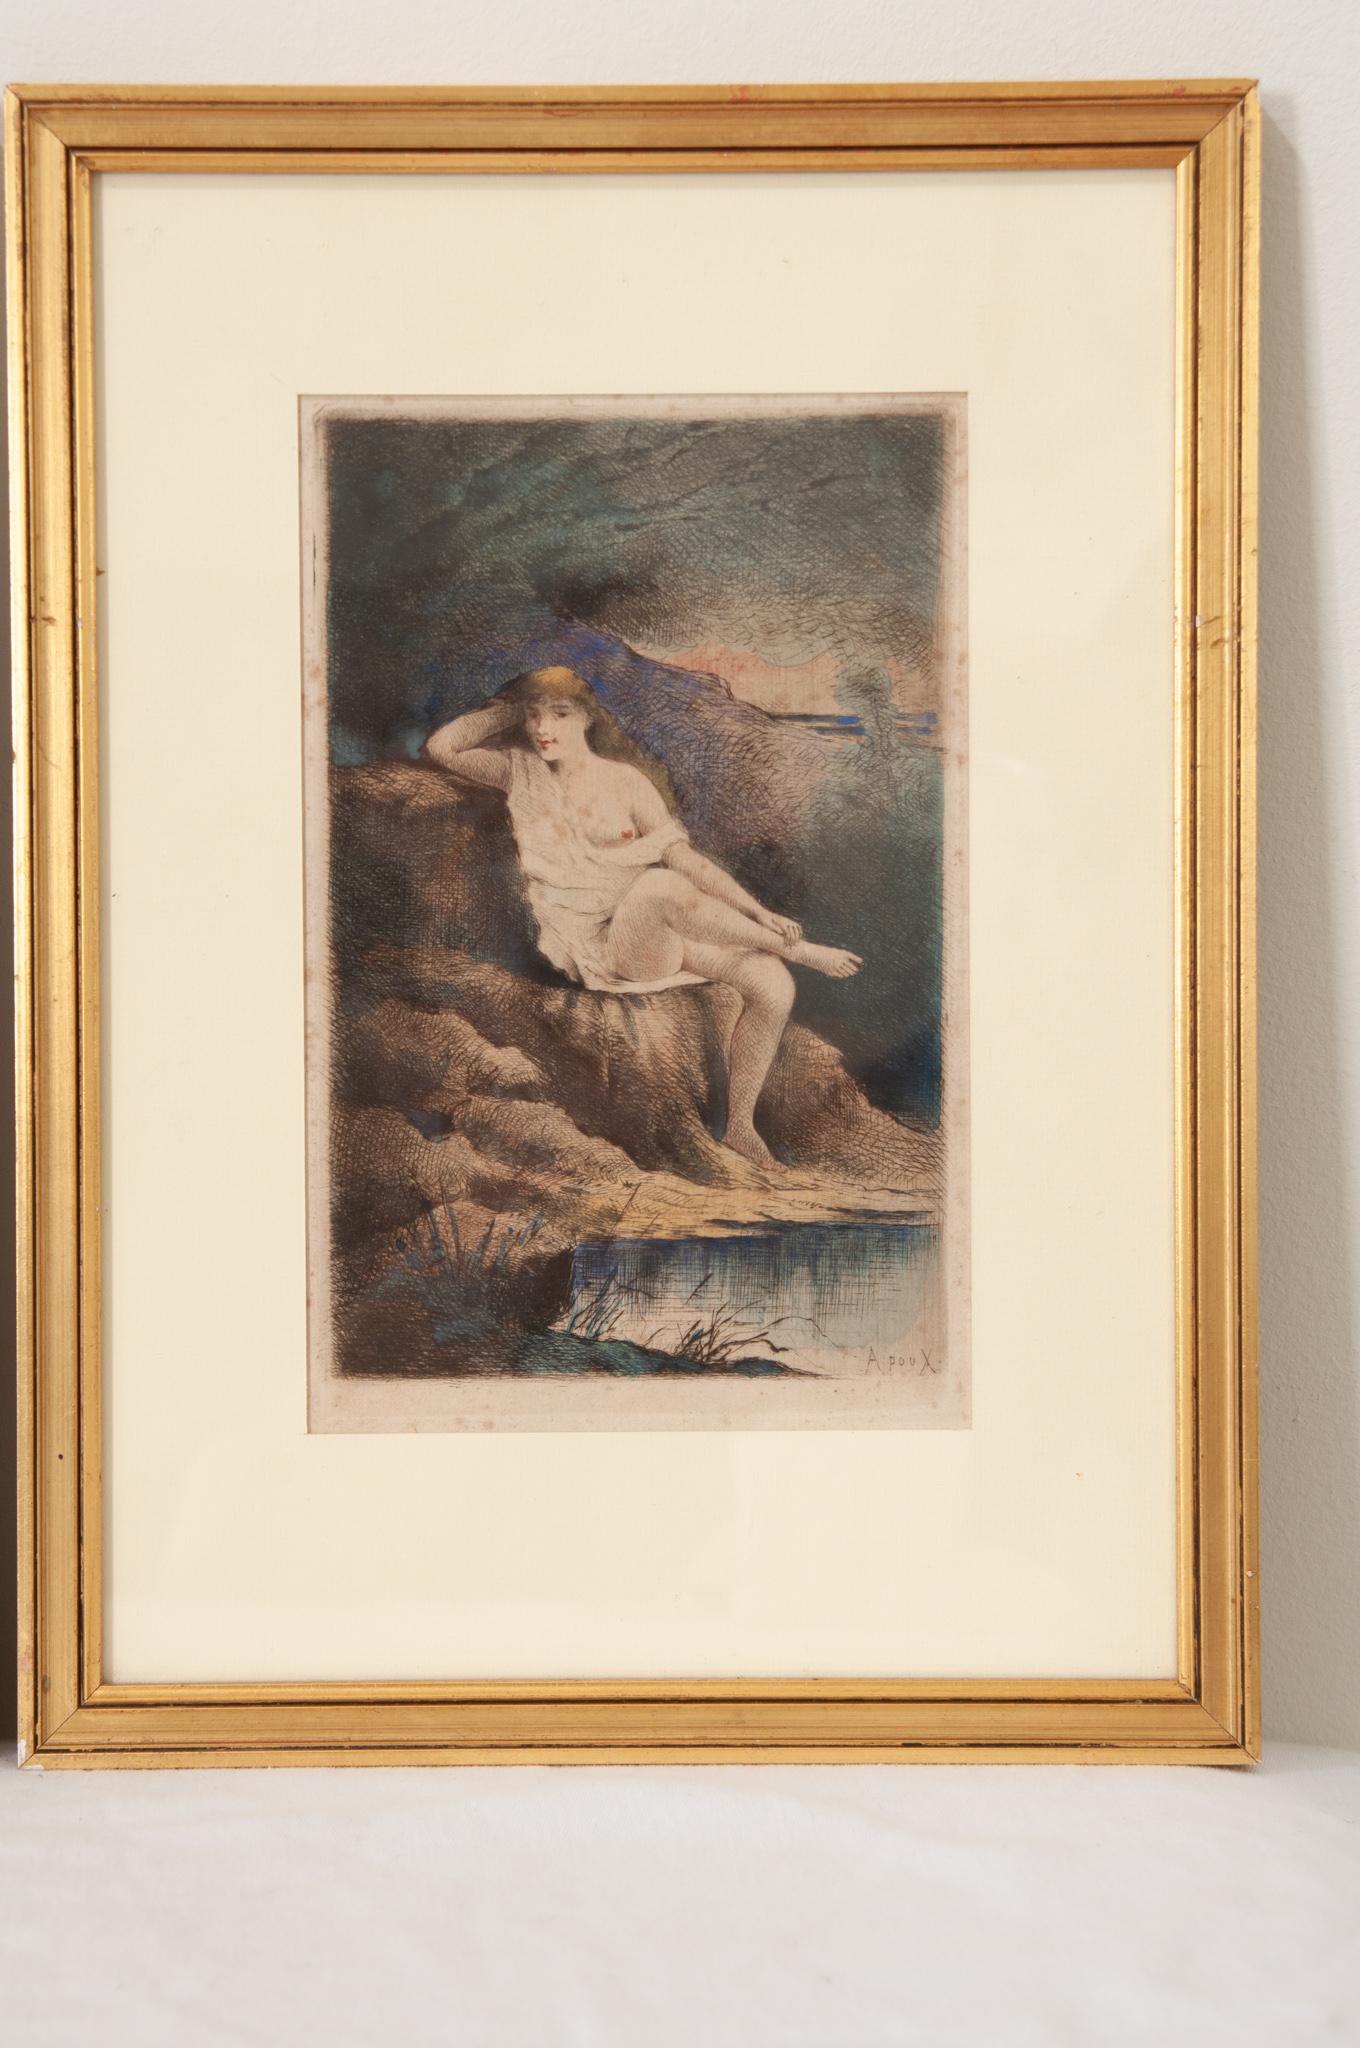 A unique set of four antique lithographs from France. Depicting four hand-colored images of posed women. Each frame is fixed with a wire and ready to be hung in your interior. Be sure to view the detailed images to see the current condition of this